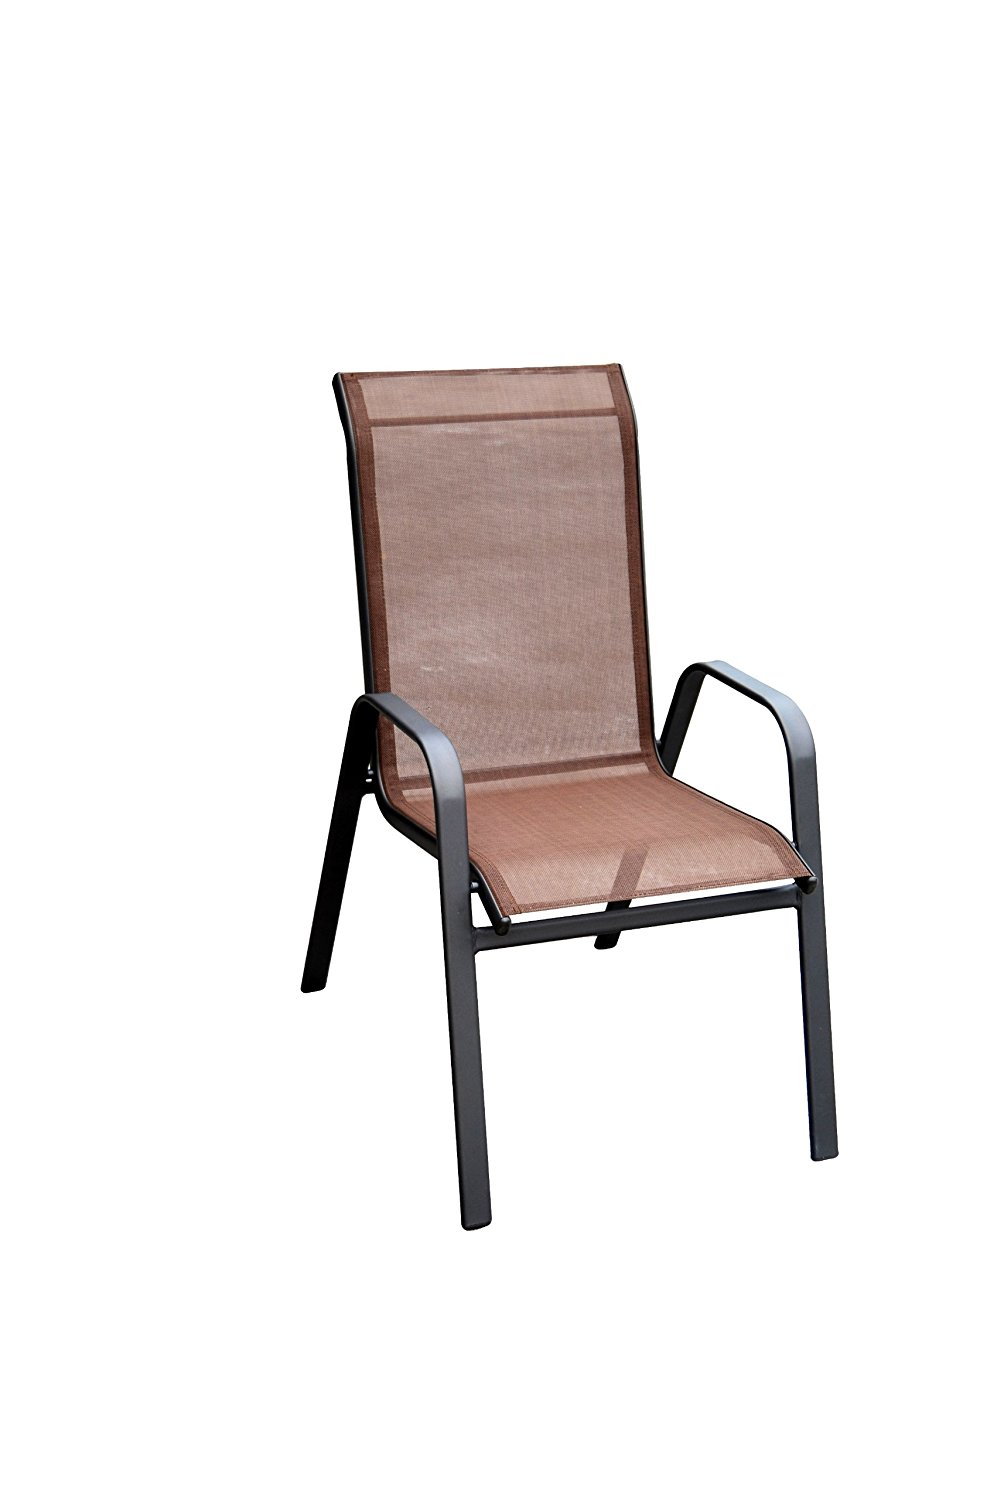 Slingback Patio Chairs Reviews And Information Outsidemodern regarding sizing 1004 X 1500